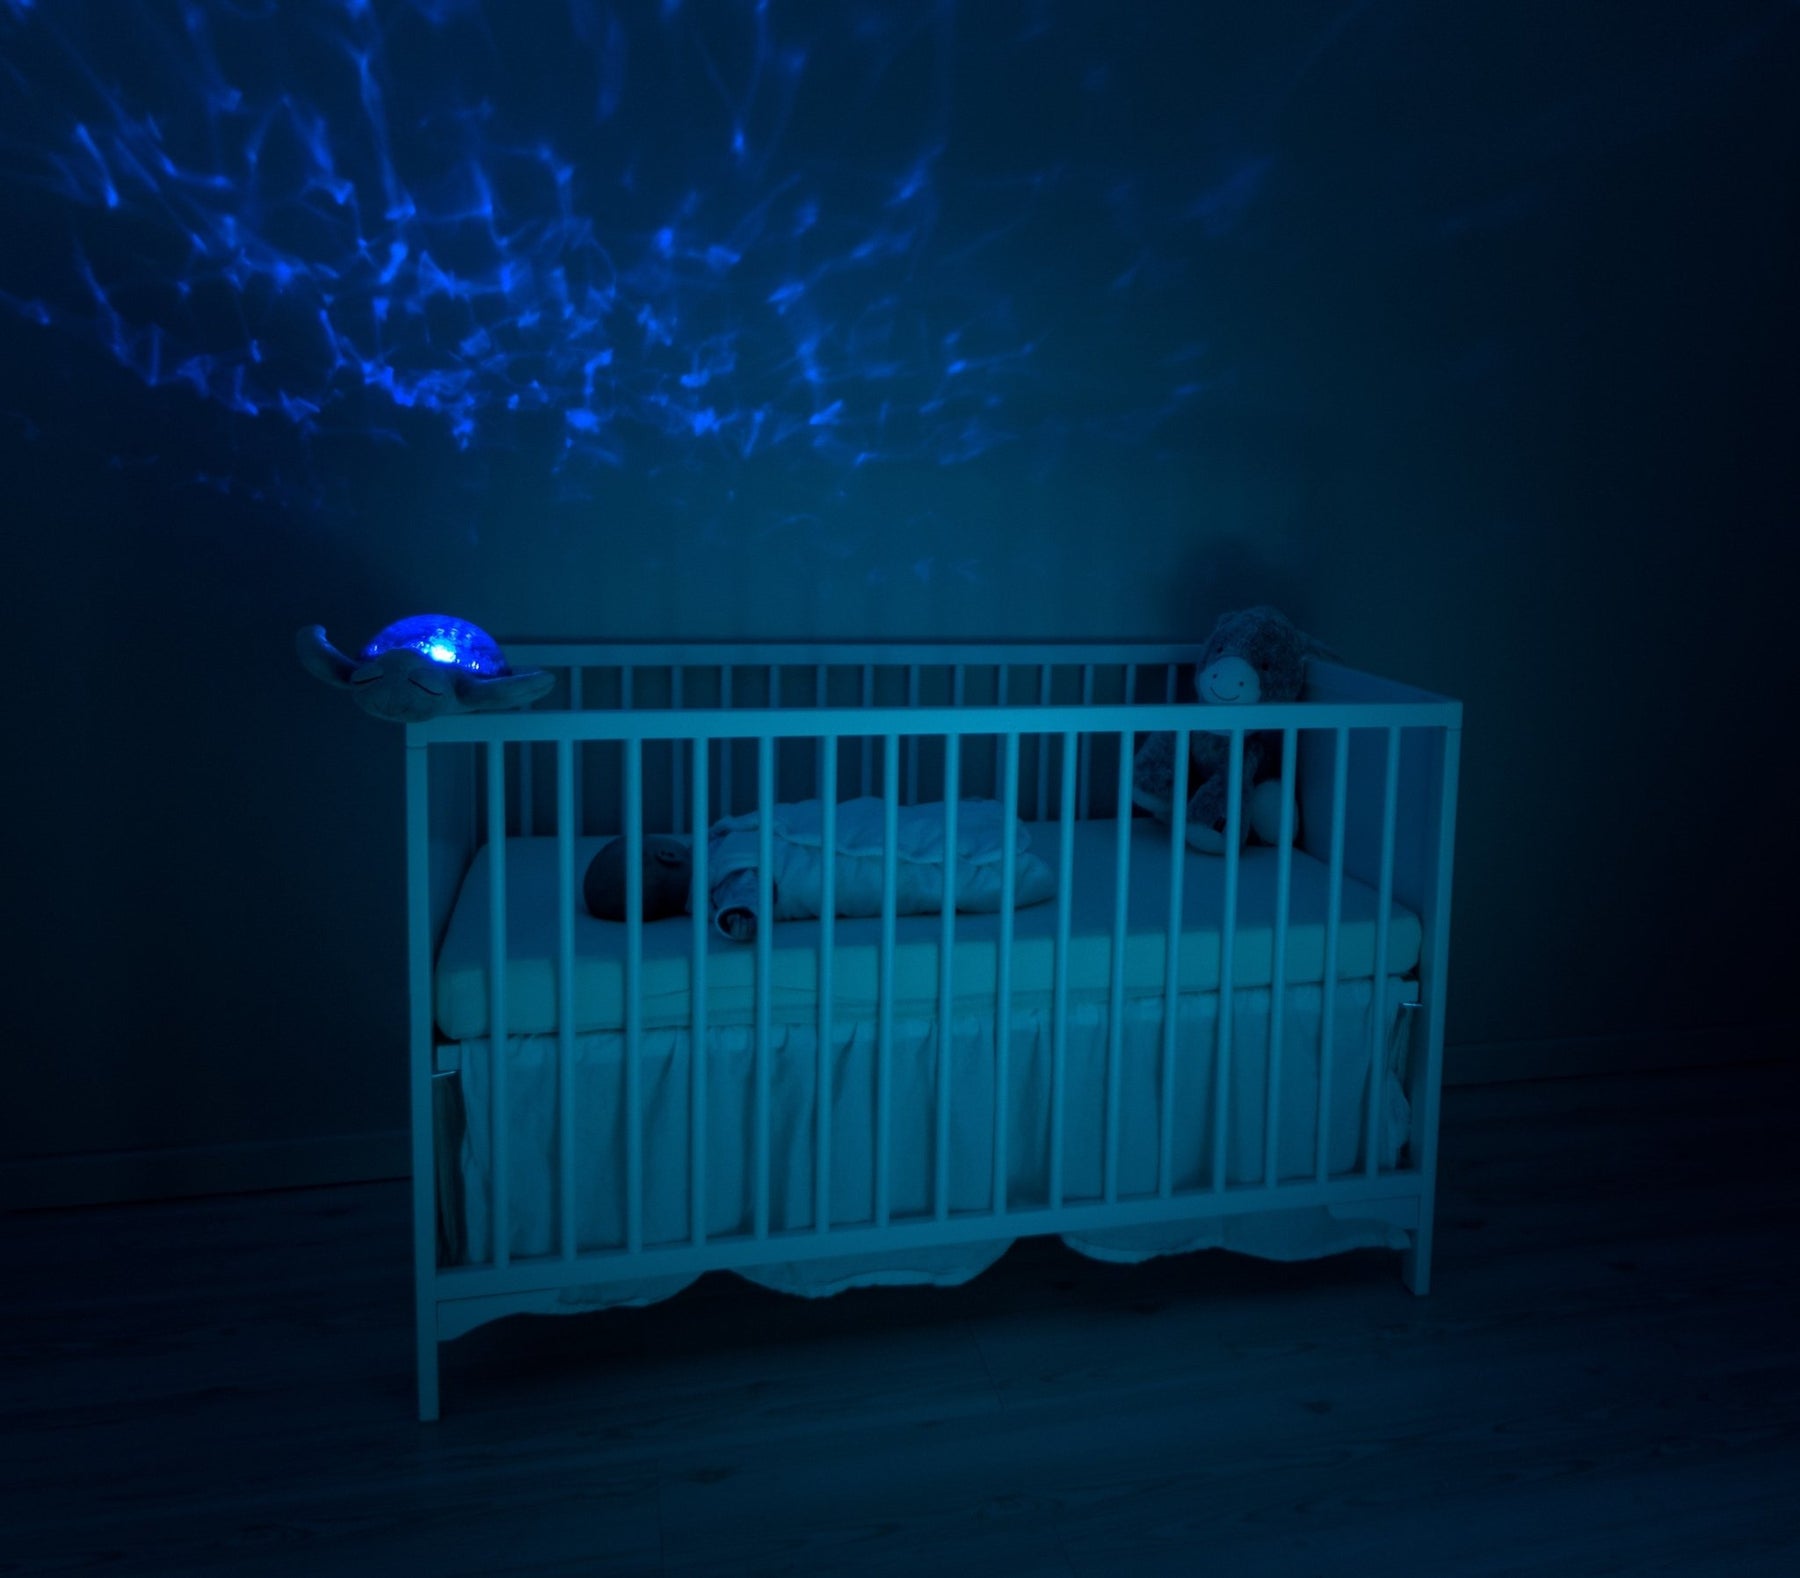 The Ultimate Guide to Babies and Sleep